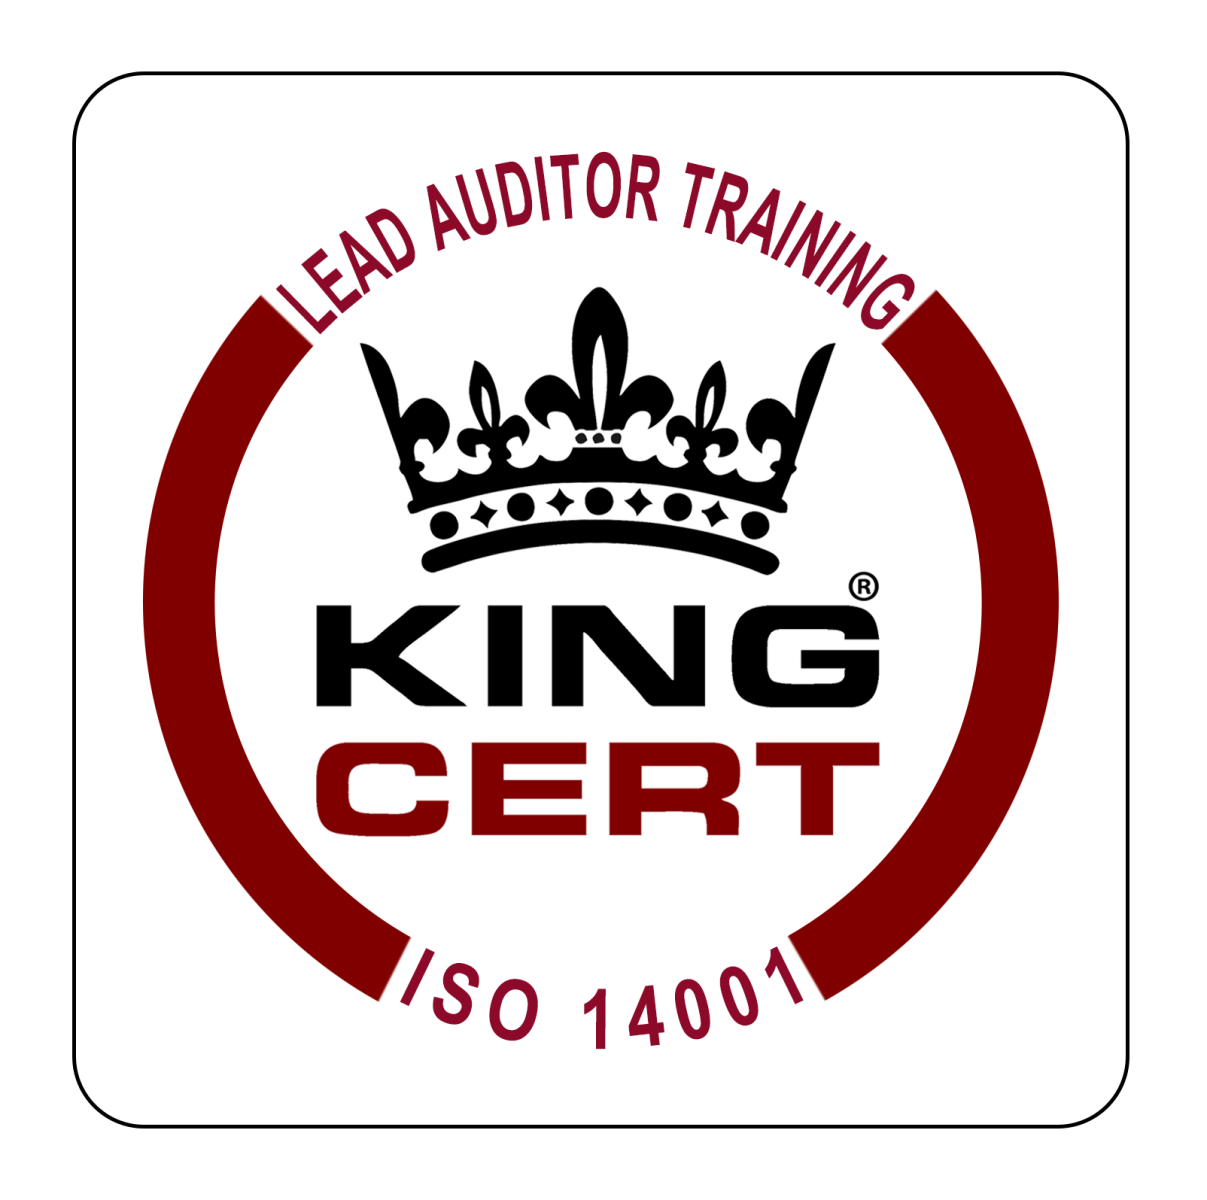 ISO 14001:2015 Environmental Management System Lead Auditor Training